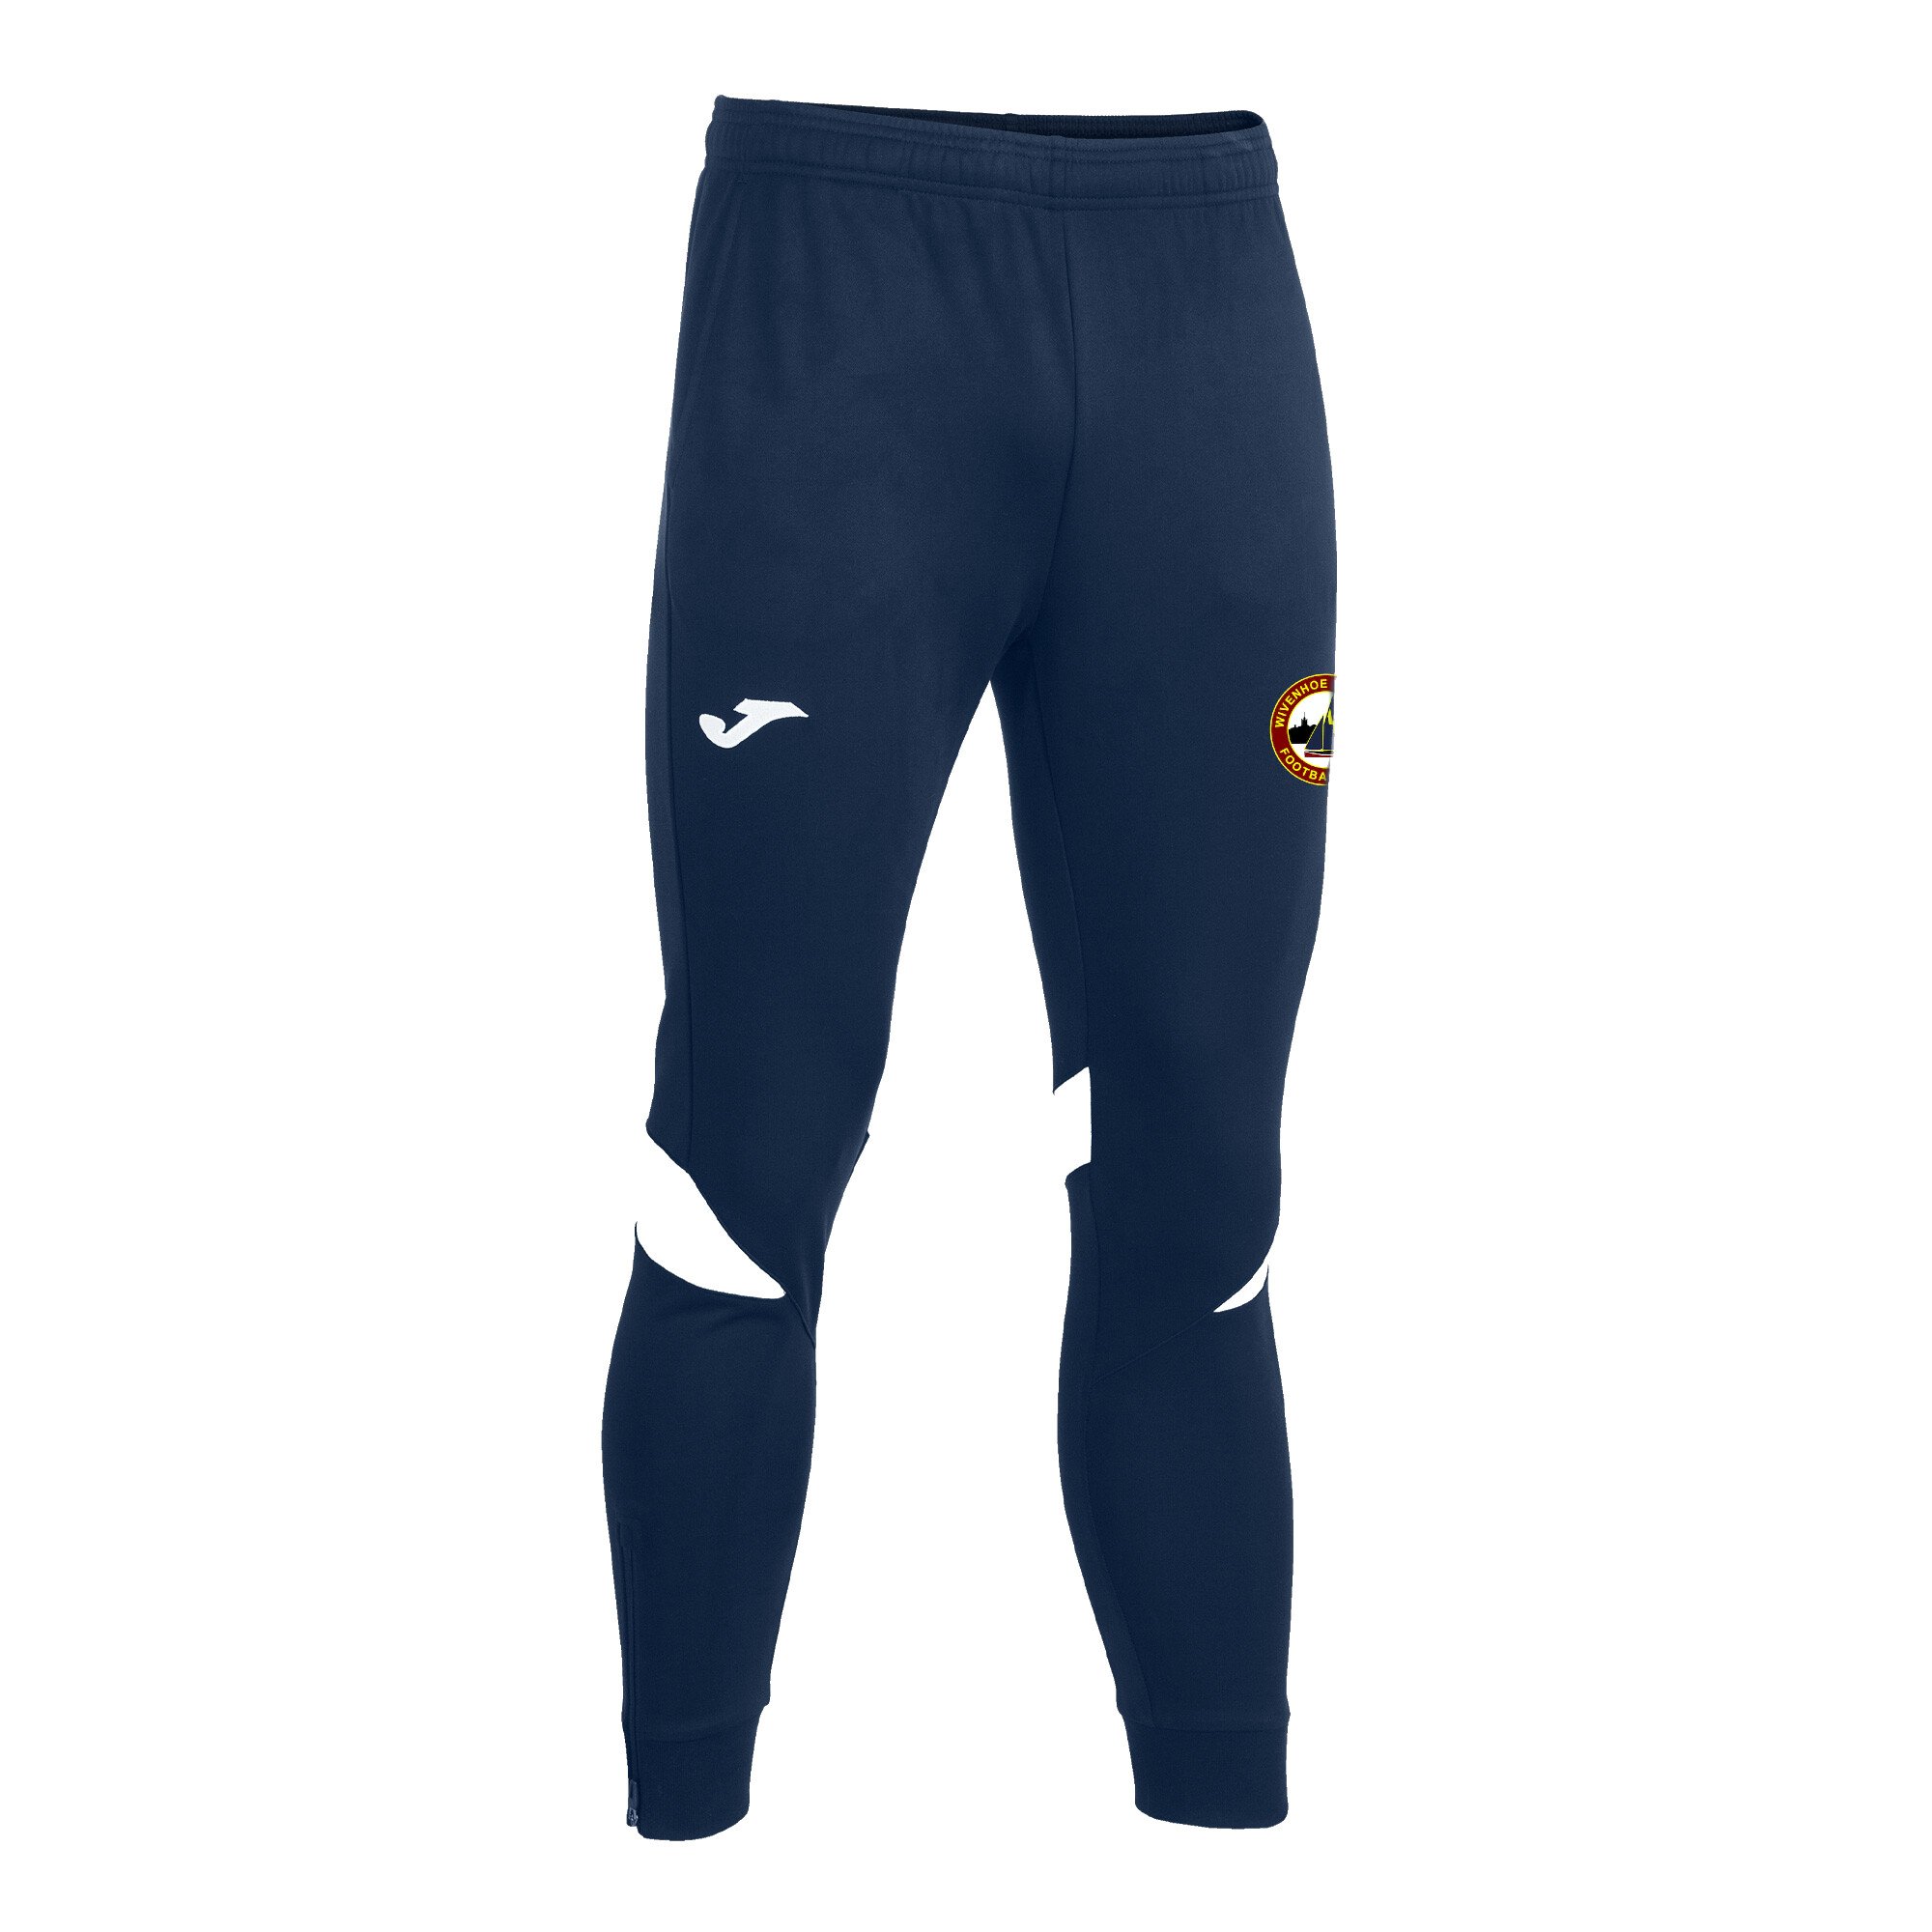 Wivenhoe Tempest FC Coaches Training Pants - Total Football Direct